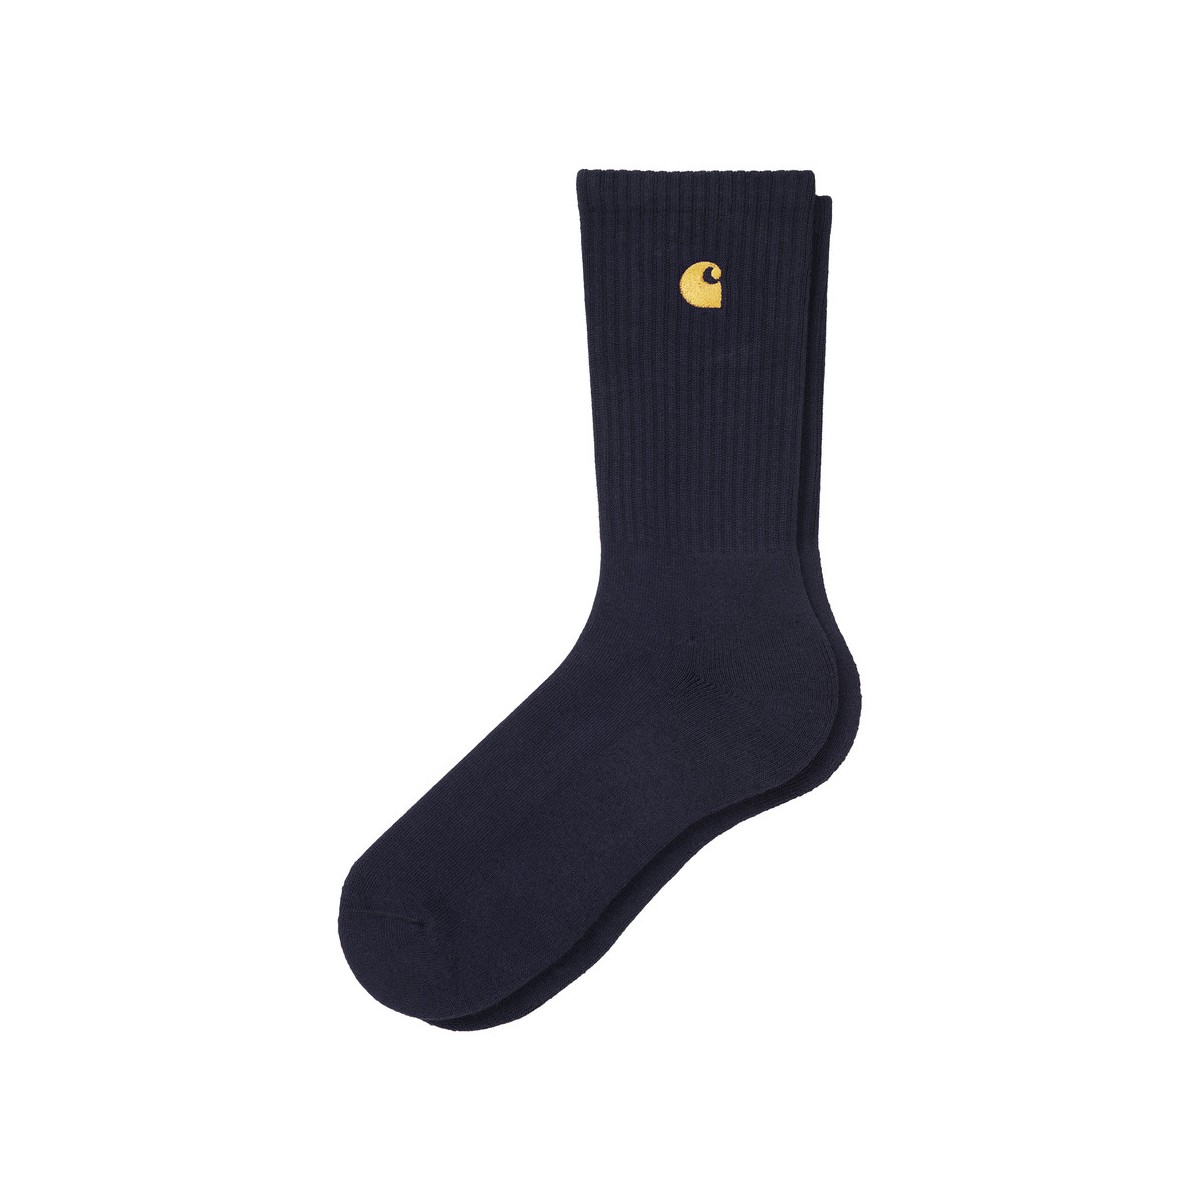 Carhartt WIP - Chaussettes marine et or